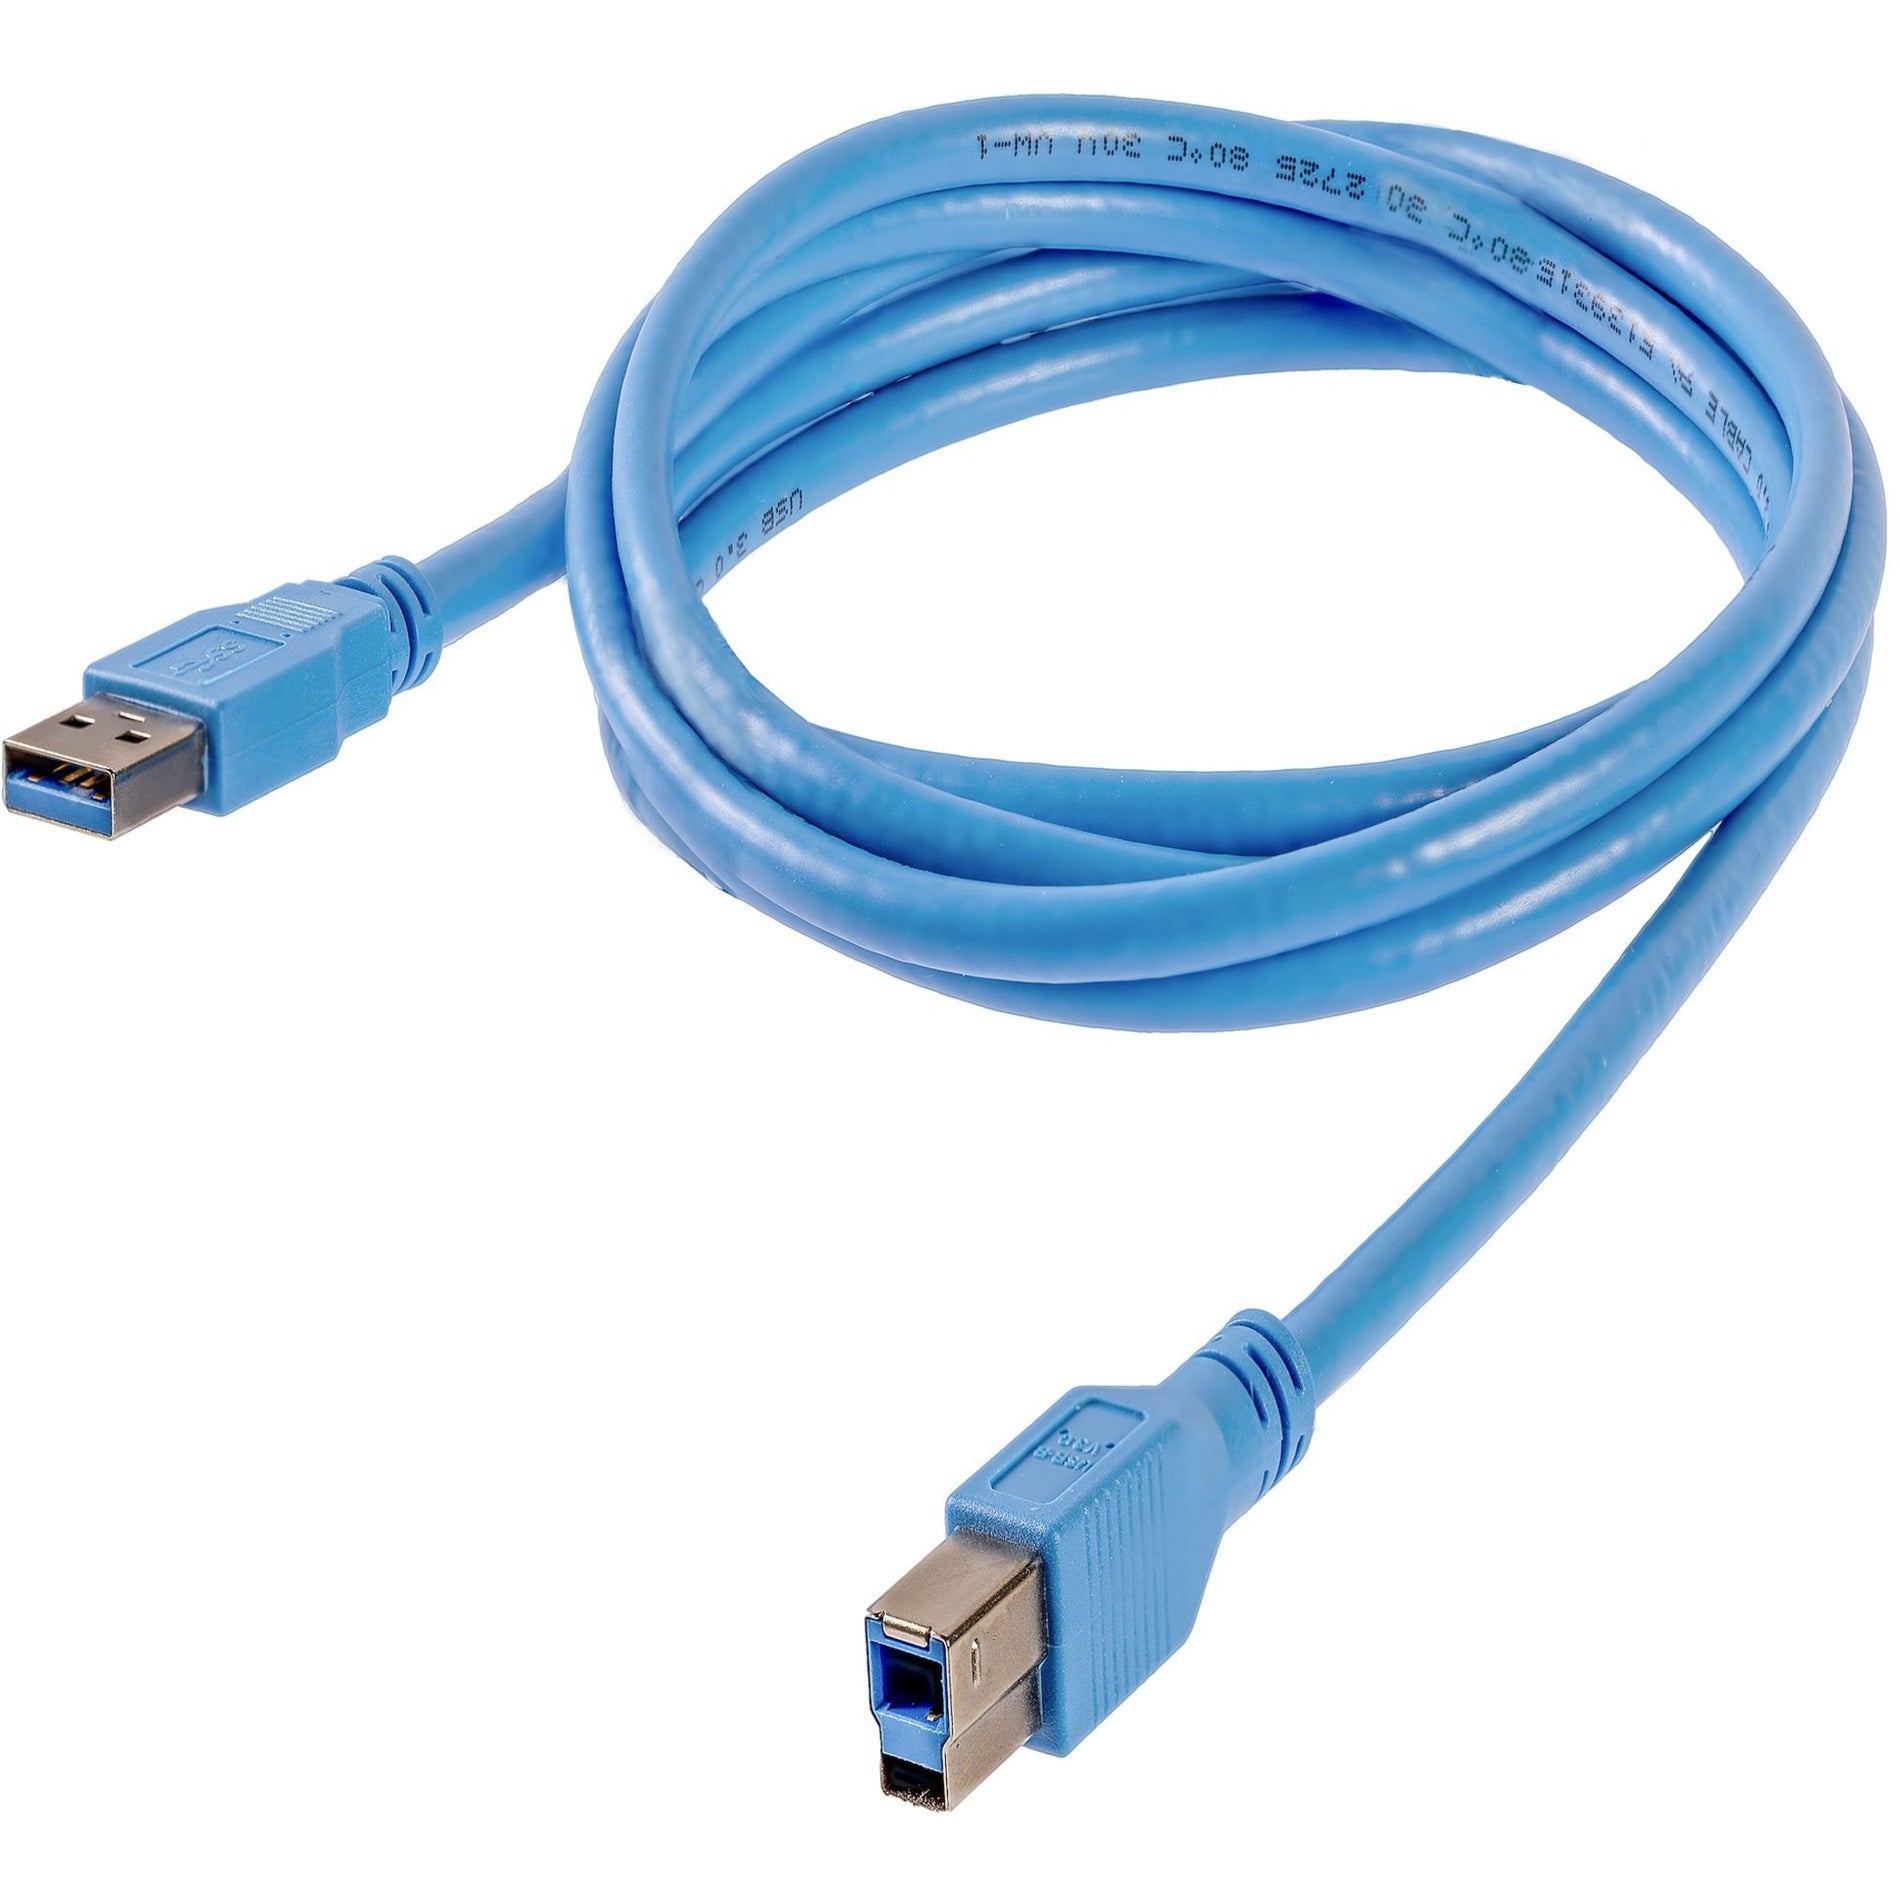 StarTech.com USB3SAB6 6 ft SuperSpeed USB 3.0 Cable A to B M/M, High-Speed Data Transfer, Lifetime Warranty